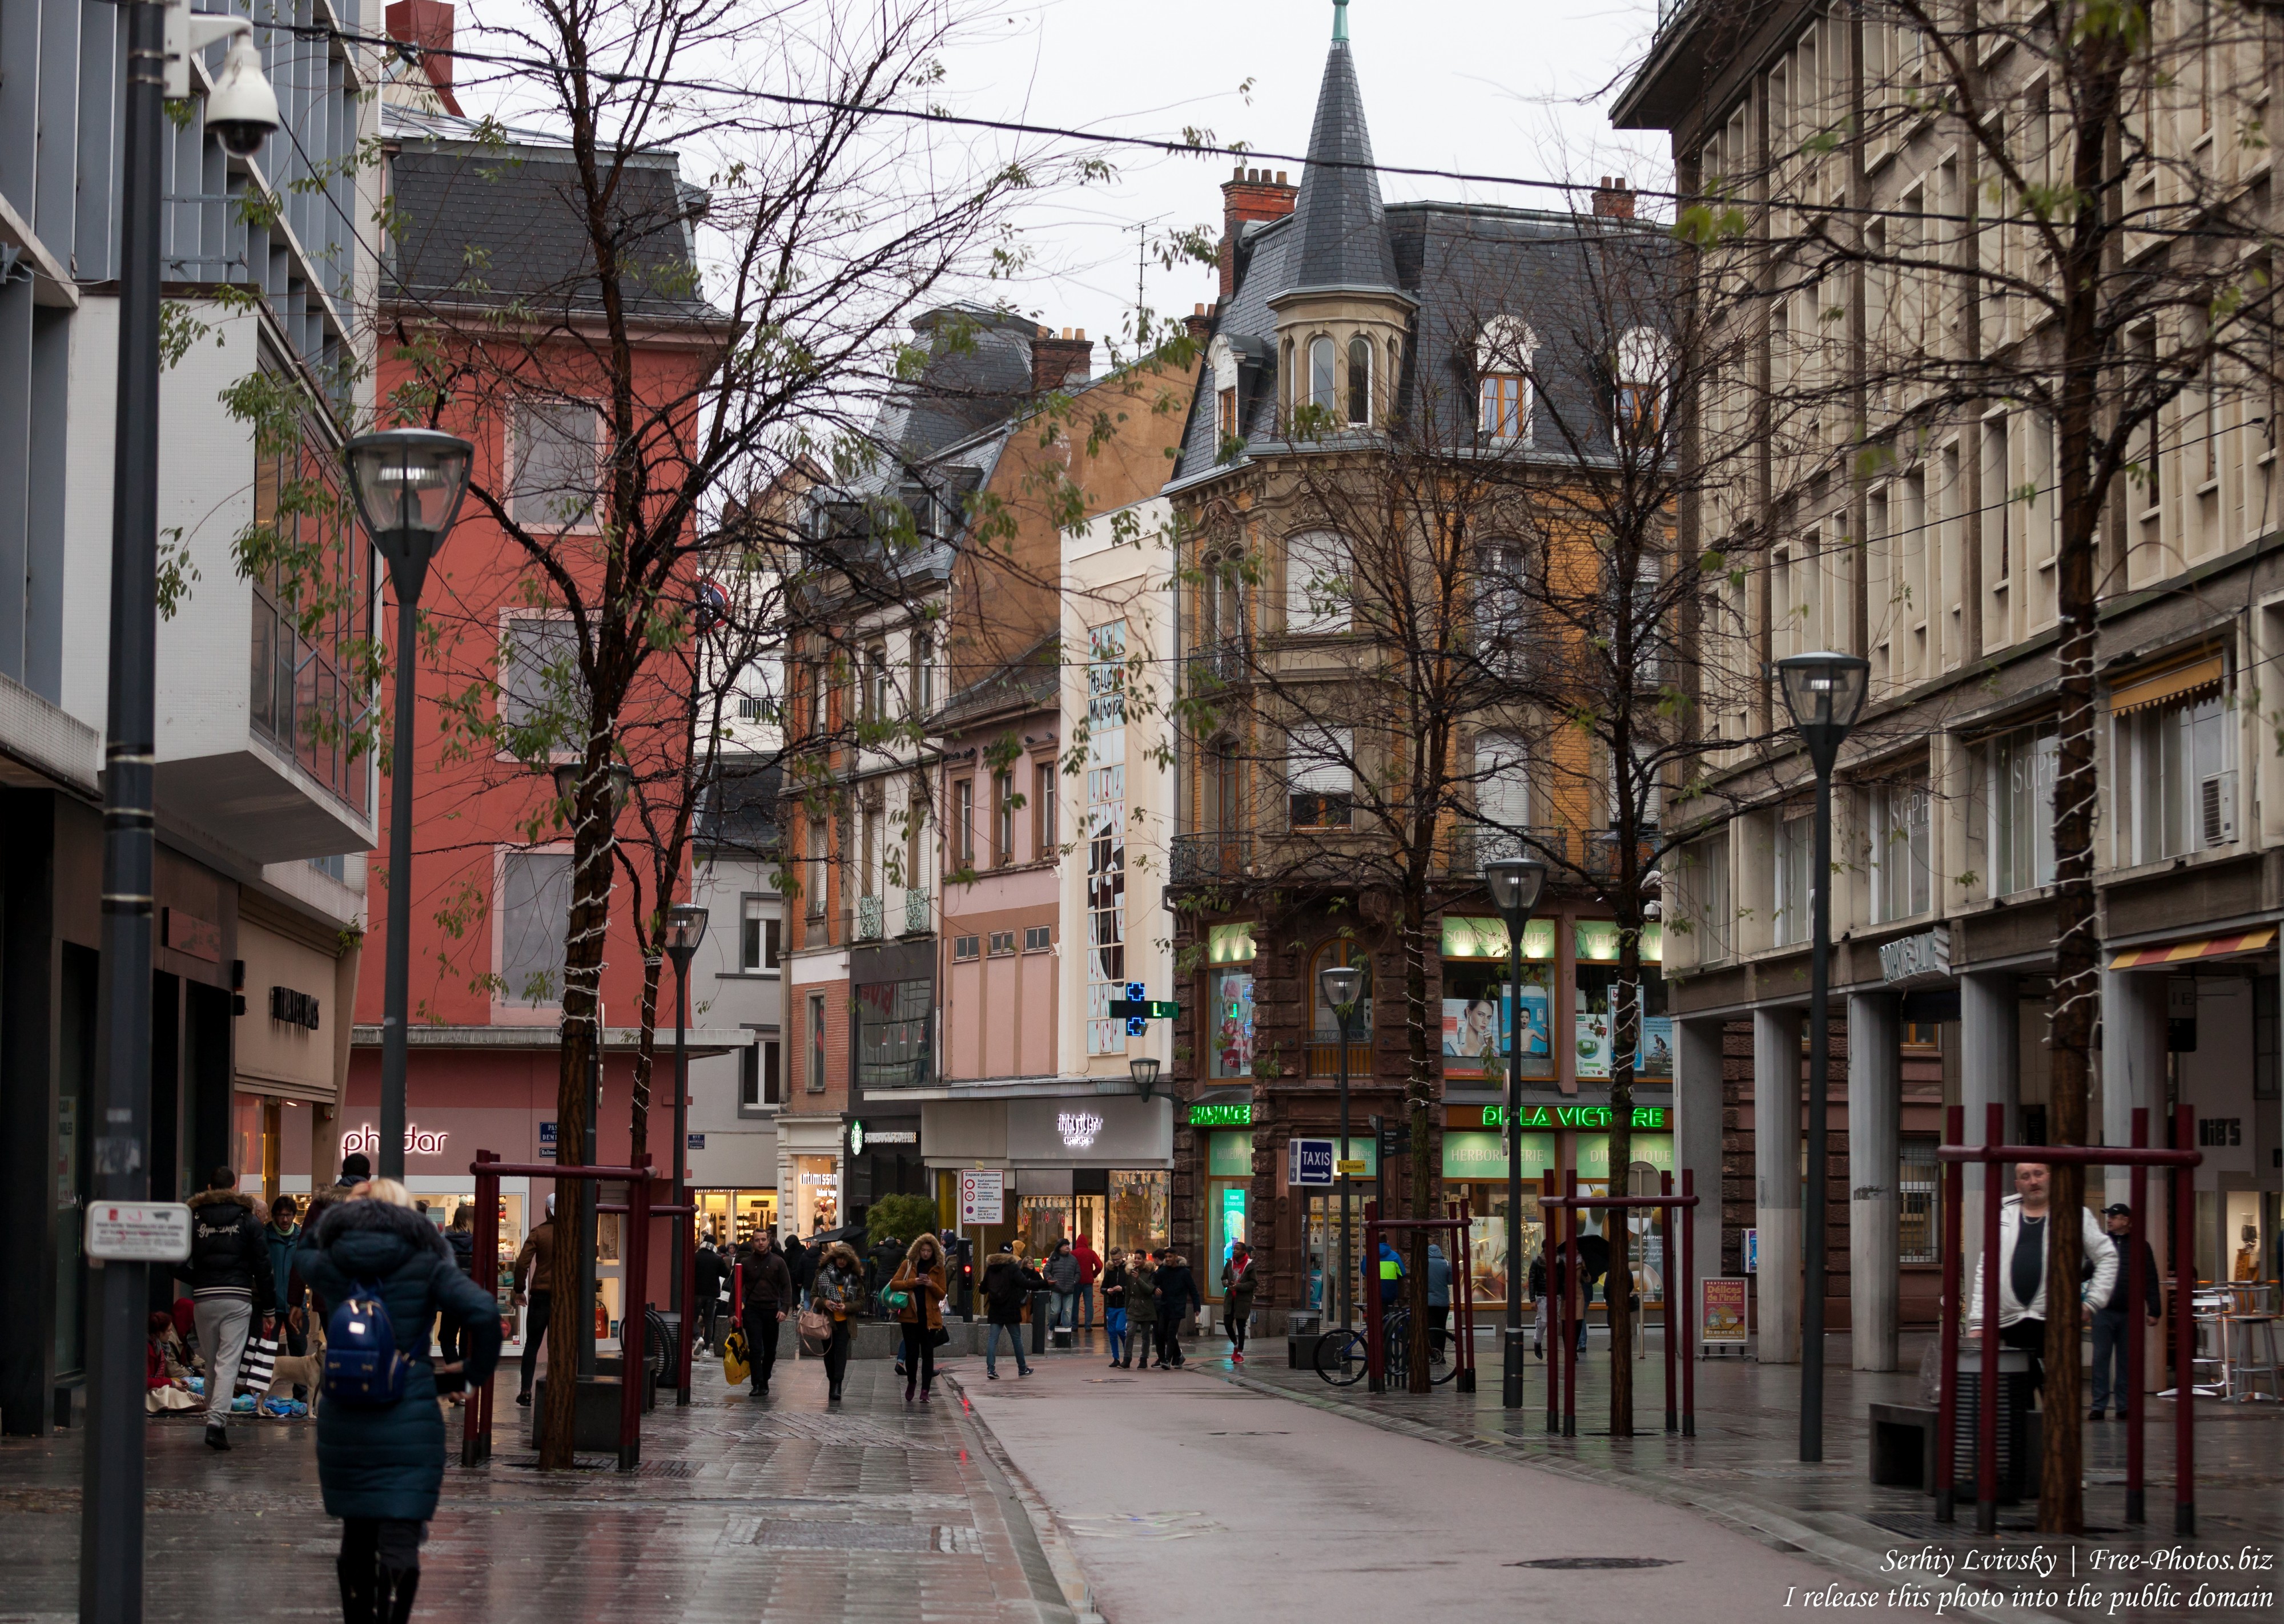 Mulhouse, France photographed in December 2017 by Serhiy Lvivsky, picture 14